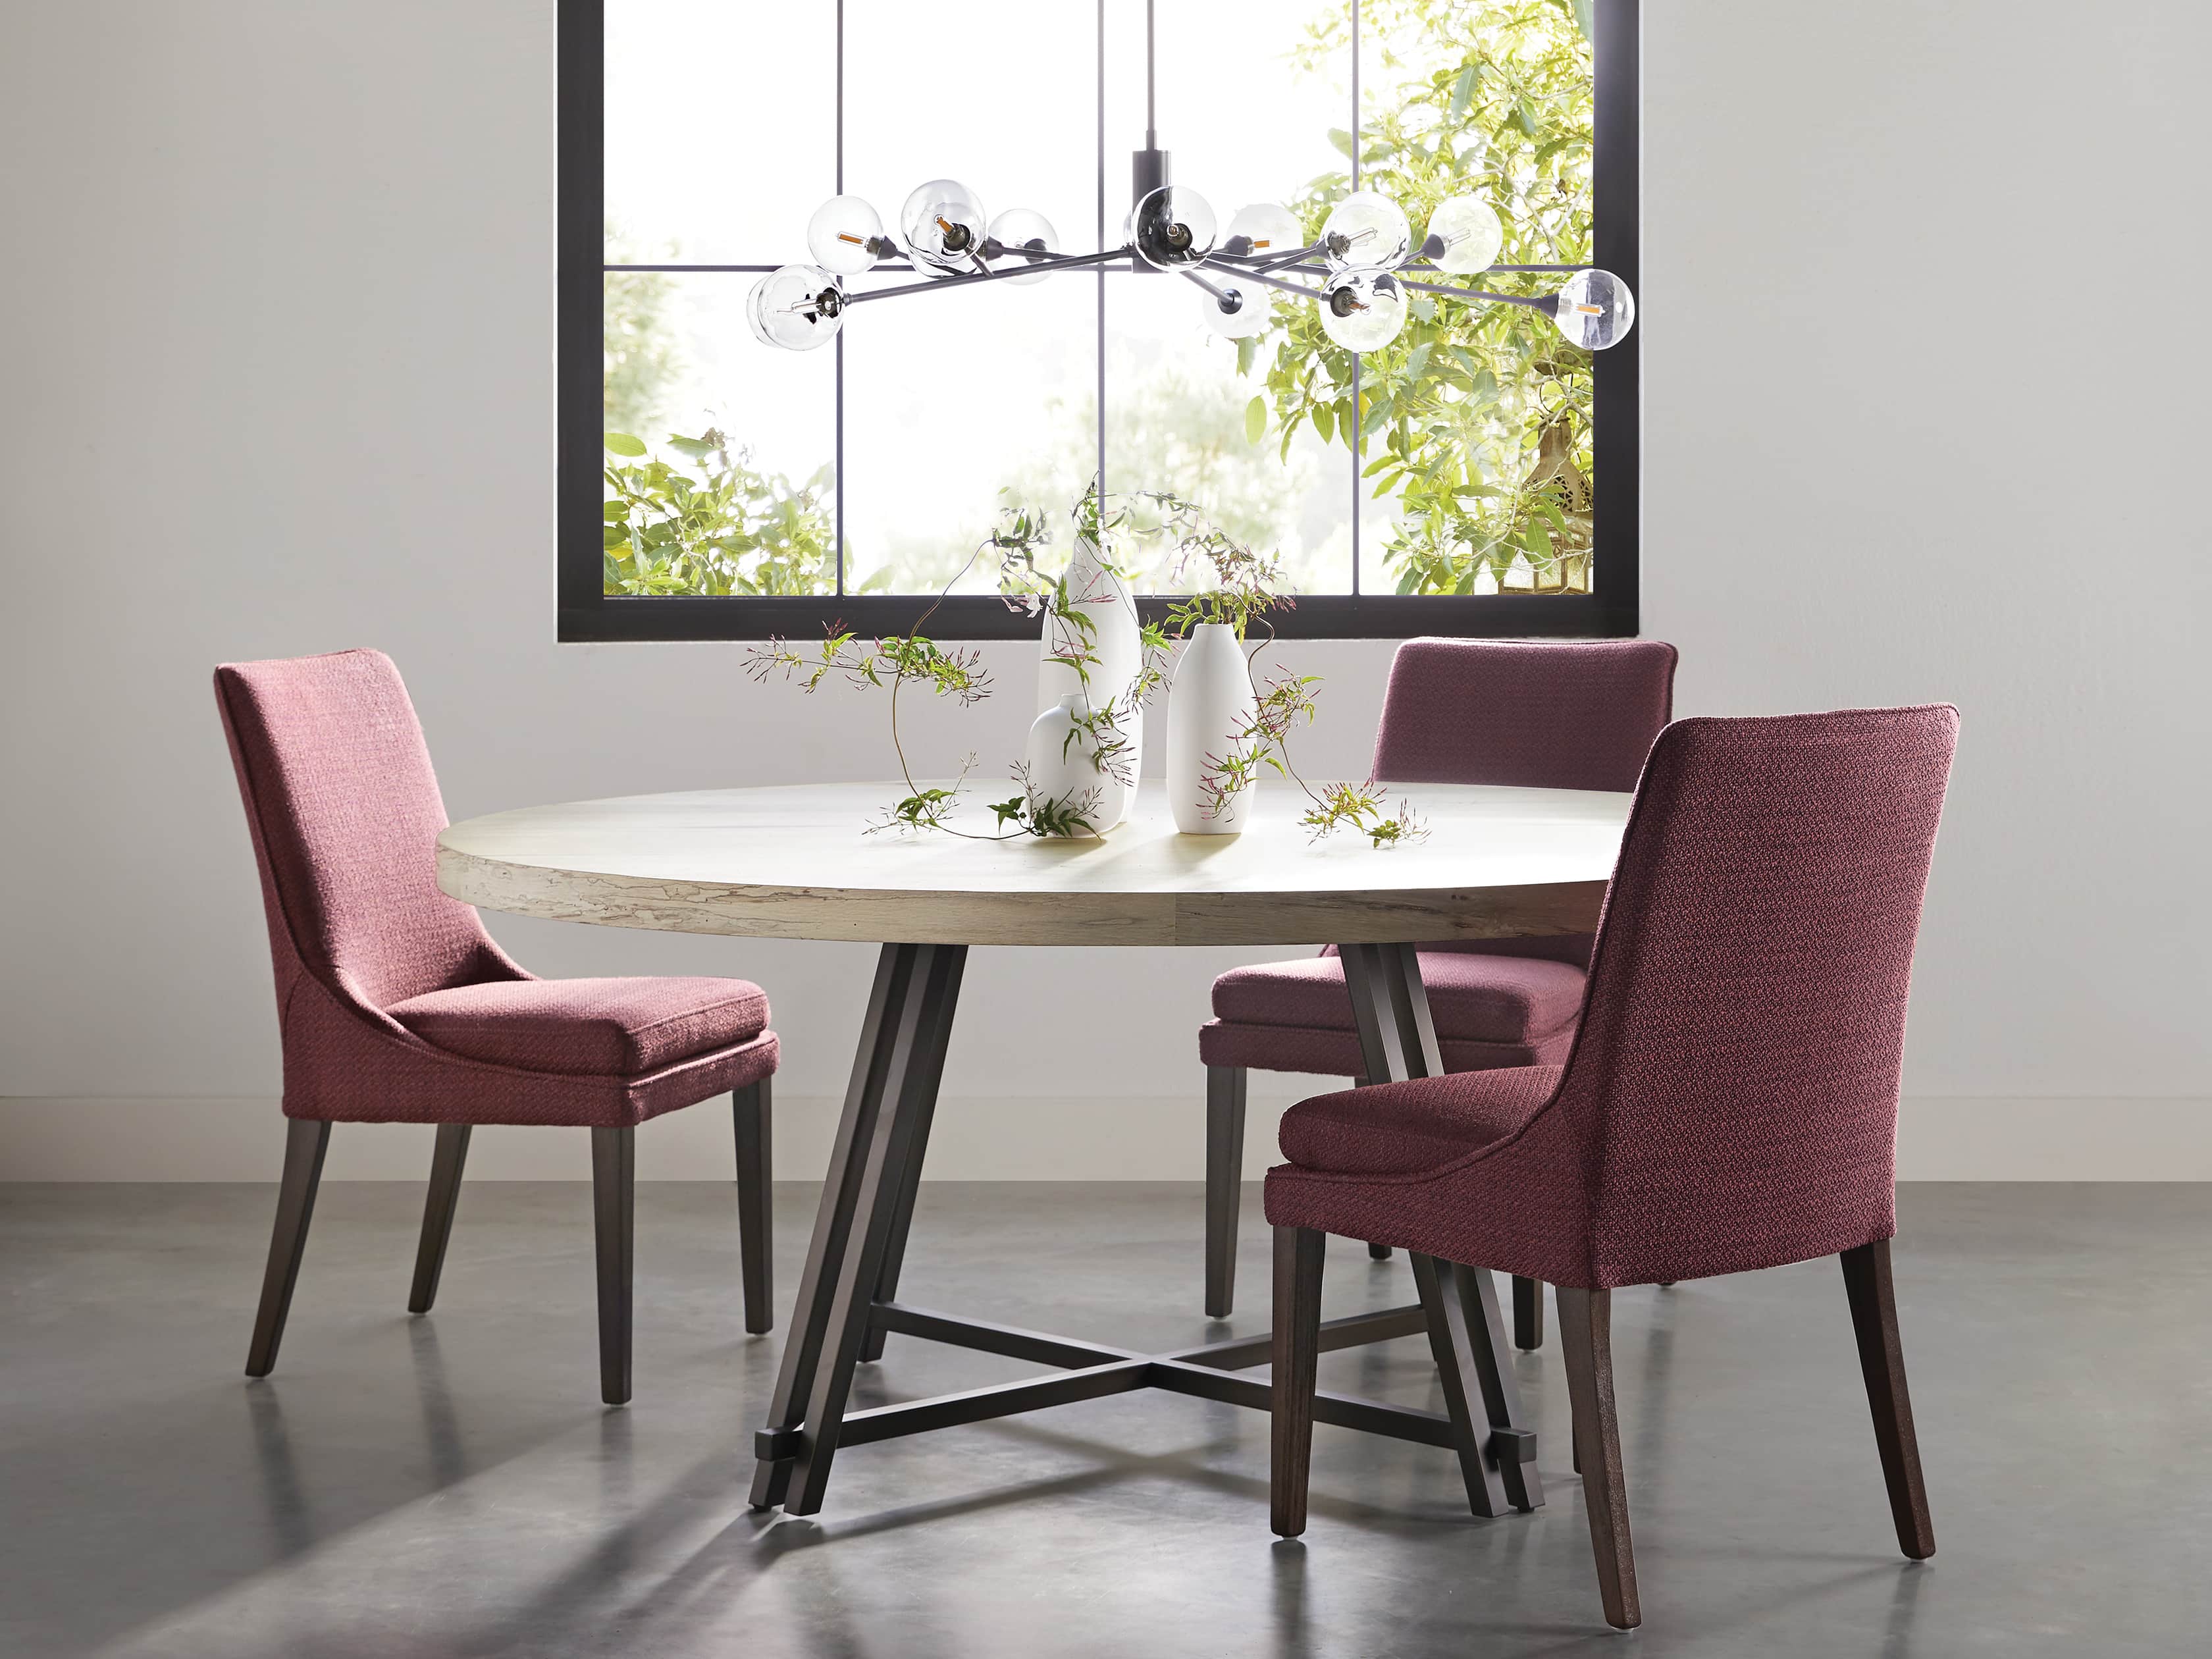 Nika Round Dining Table Arhaus, Round Kitchen Table With Bench